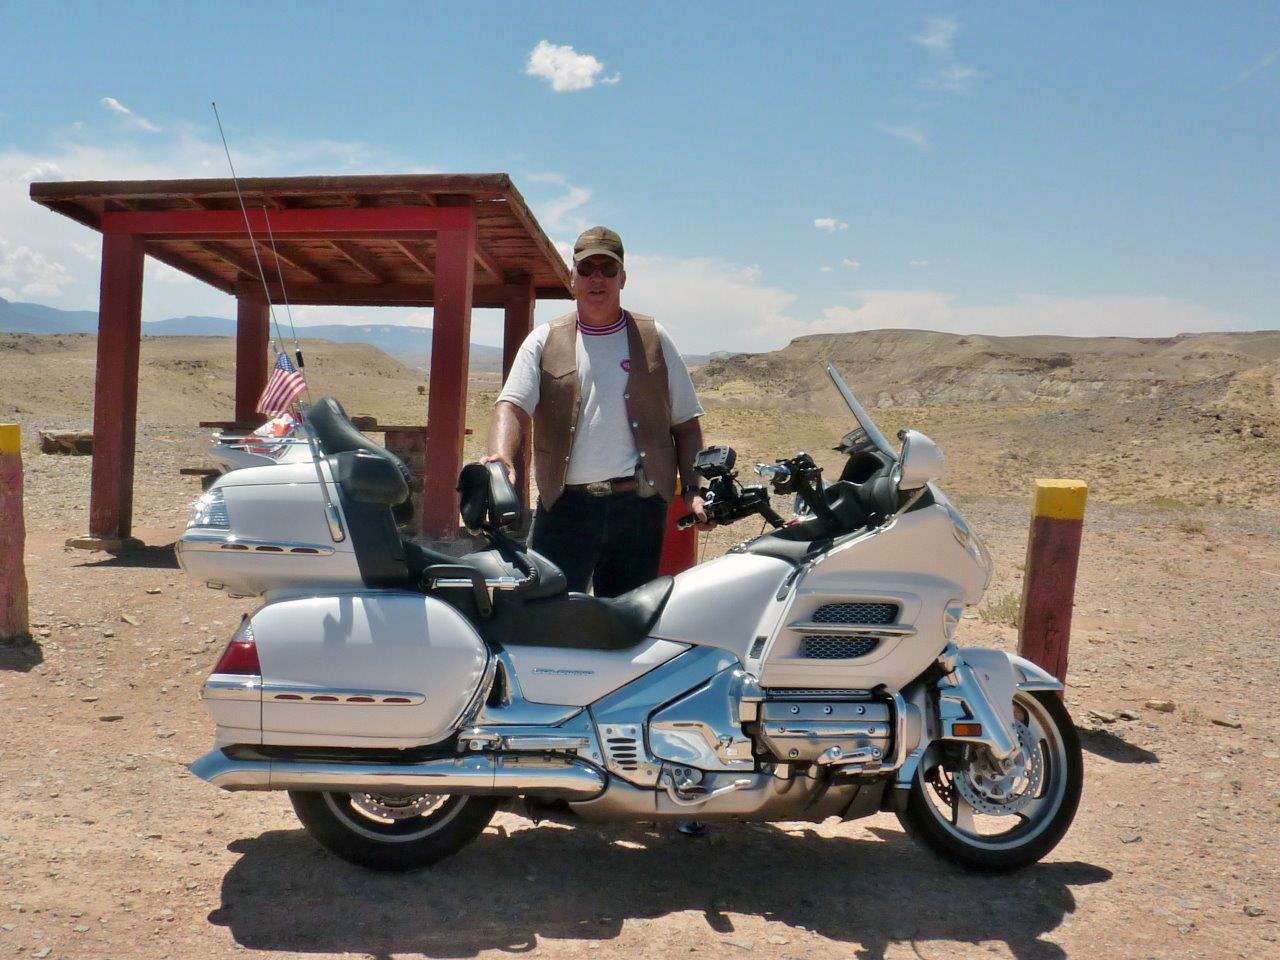 Trip to Colorado with my beloved 2008 Honda Goldwing, the best touring bike in the world despite what the Harley riders think. Photo courtesy Gord Friedrich, pensioner